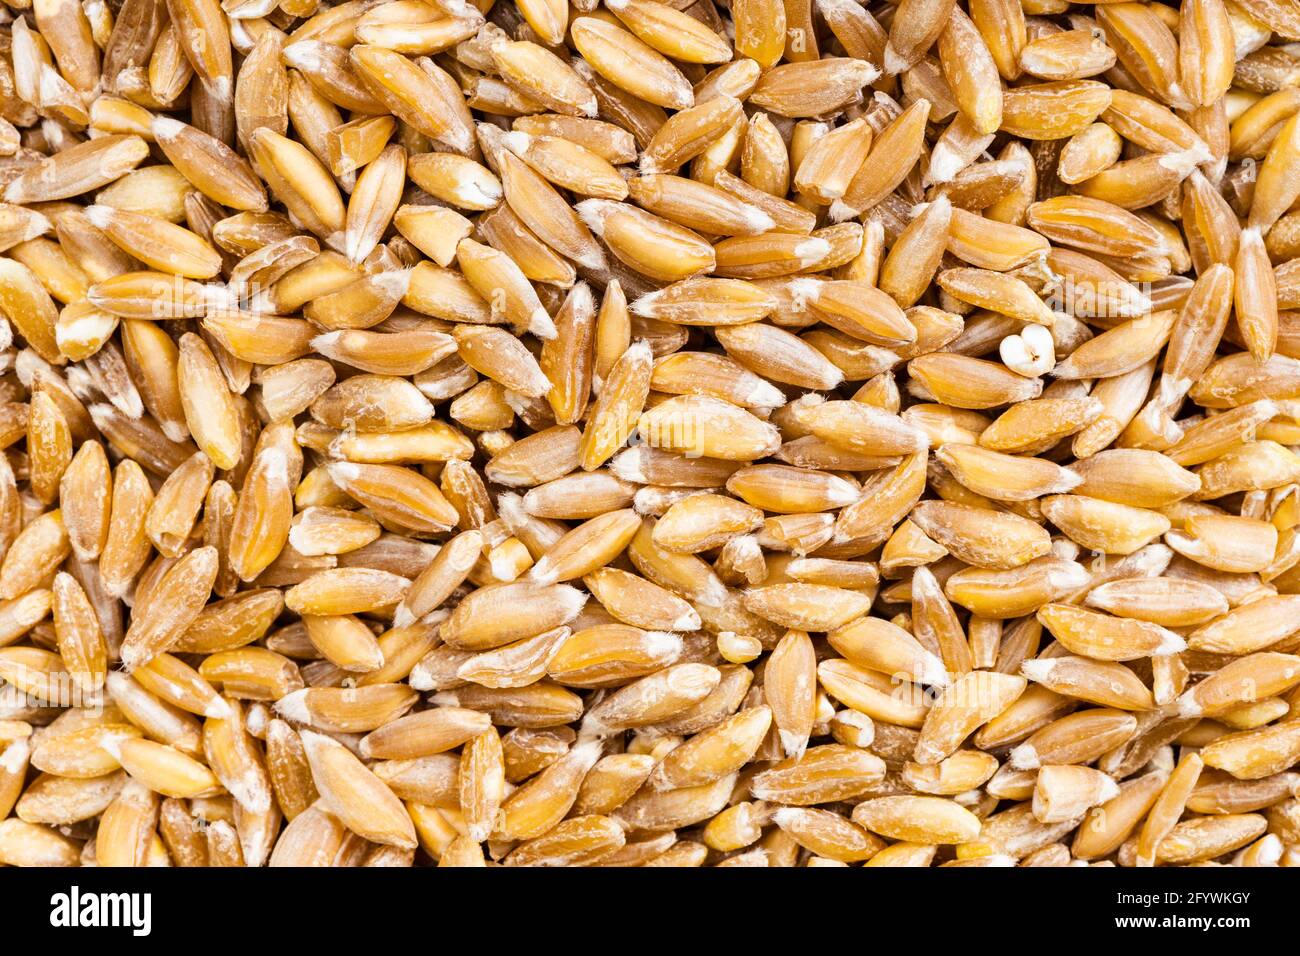 food background - uncooked Emmer farro hulled wheat grains Stock Photo